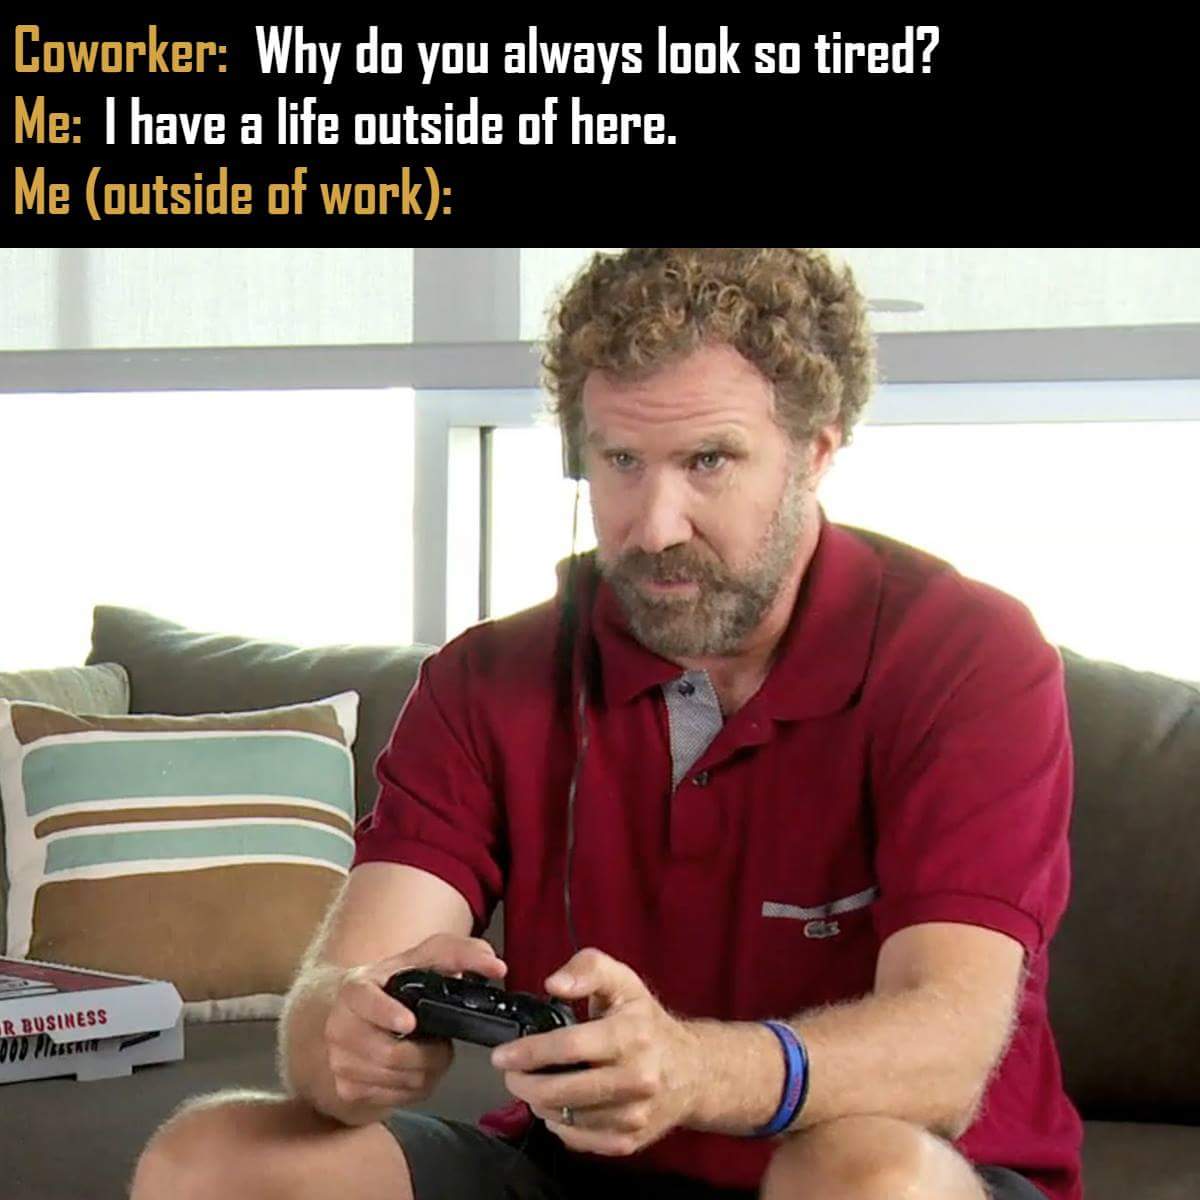 will ferrell video games - Coworker Why do you always look so tired? Me I have a life outside of here. Me outside of work R Business 00 Plus